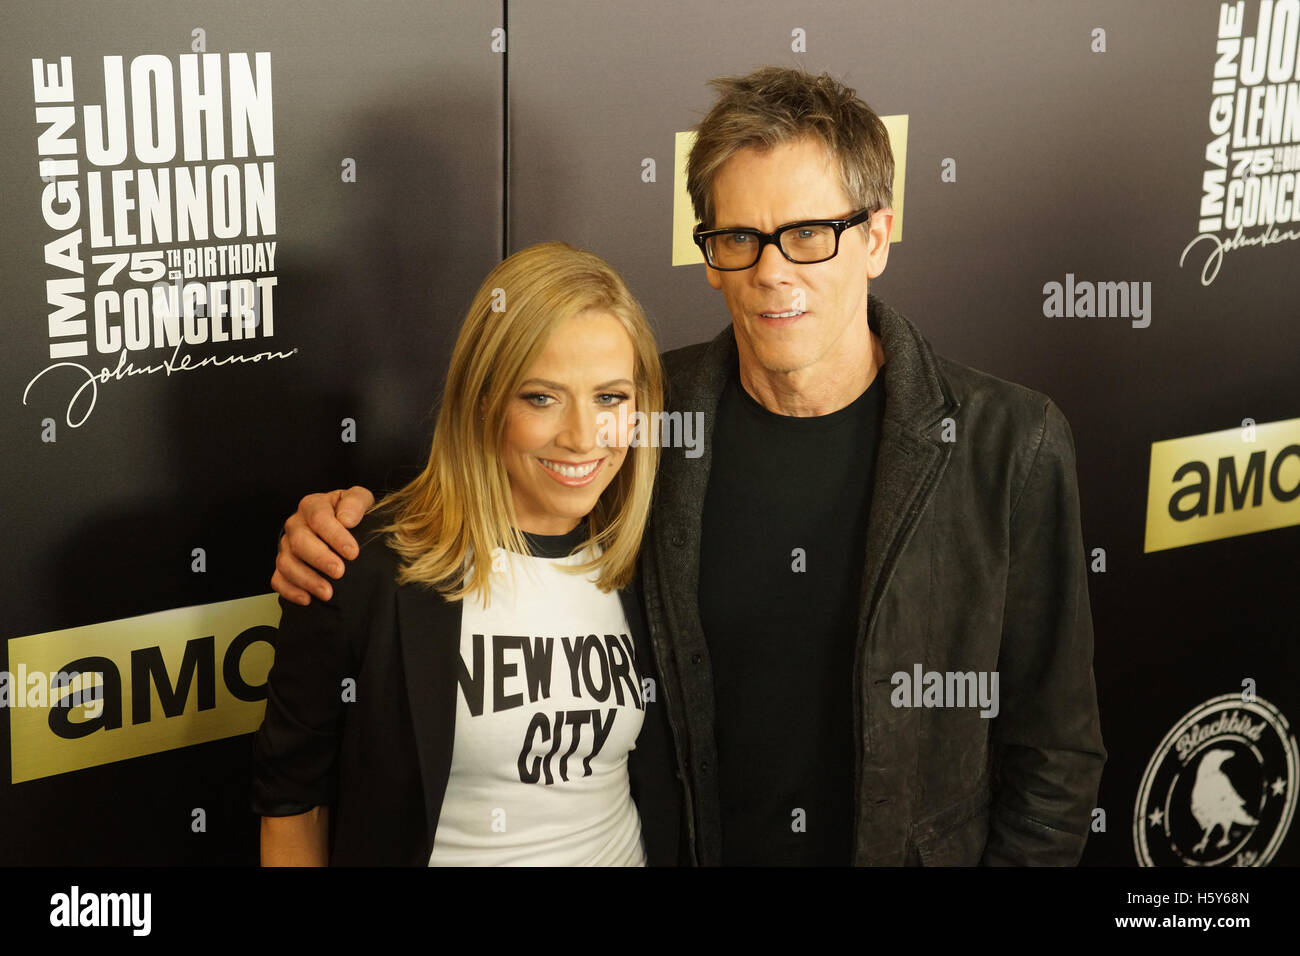 Sheryl Crow & Kevin Bacon on the Red Carpet prior to the Imagine: John Lennon 75th Birthday Concert @ The Theater at Madison Square Garden In New York City on December 5th, 2015. Stock Photo